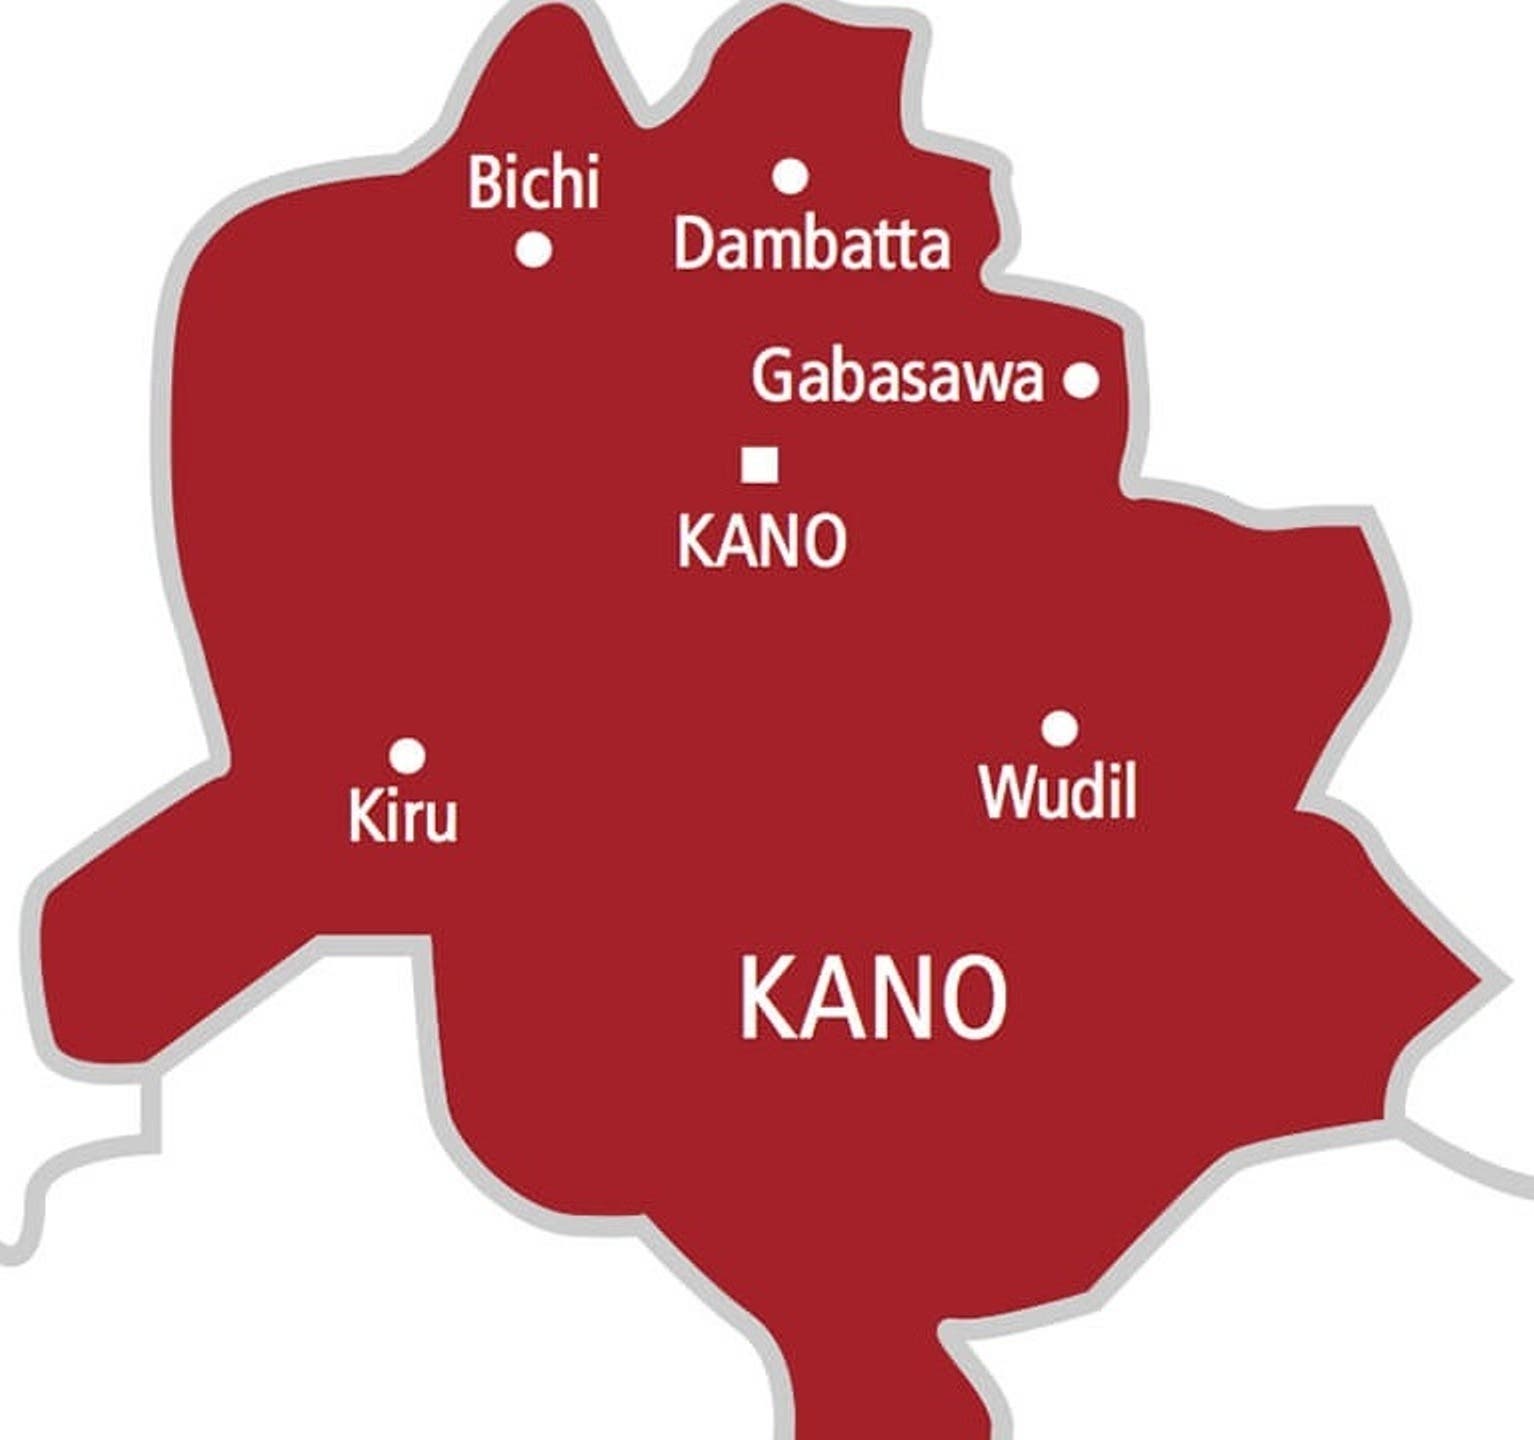 Teenager in police net for allegedly removing eyeball of 12-year-old in Kano